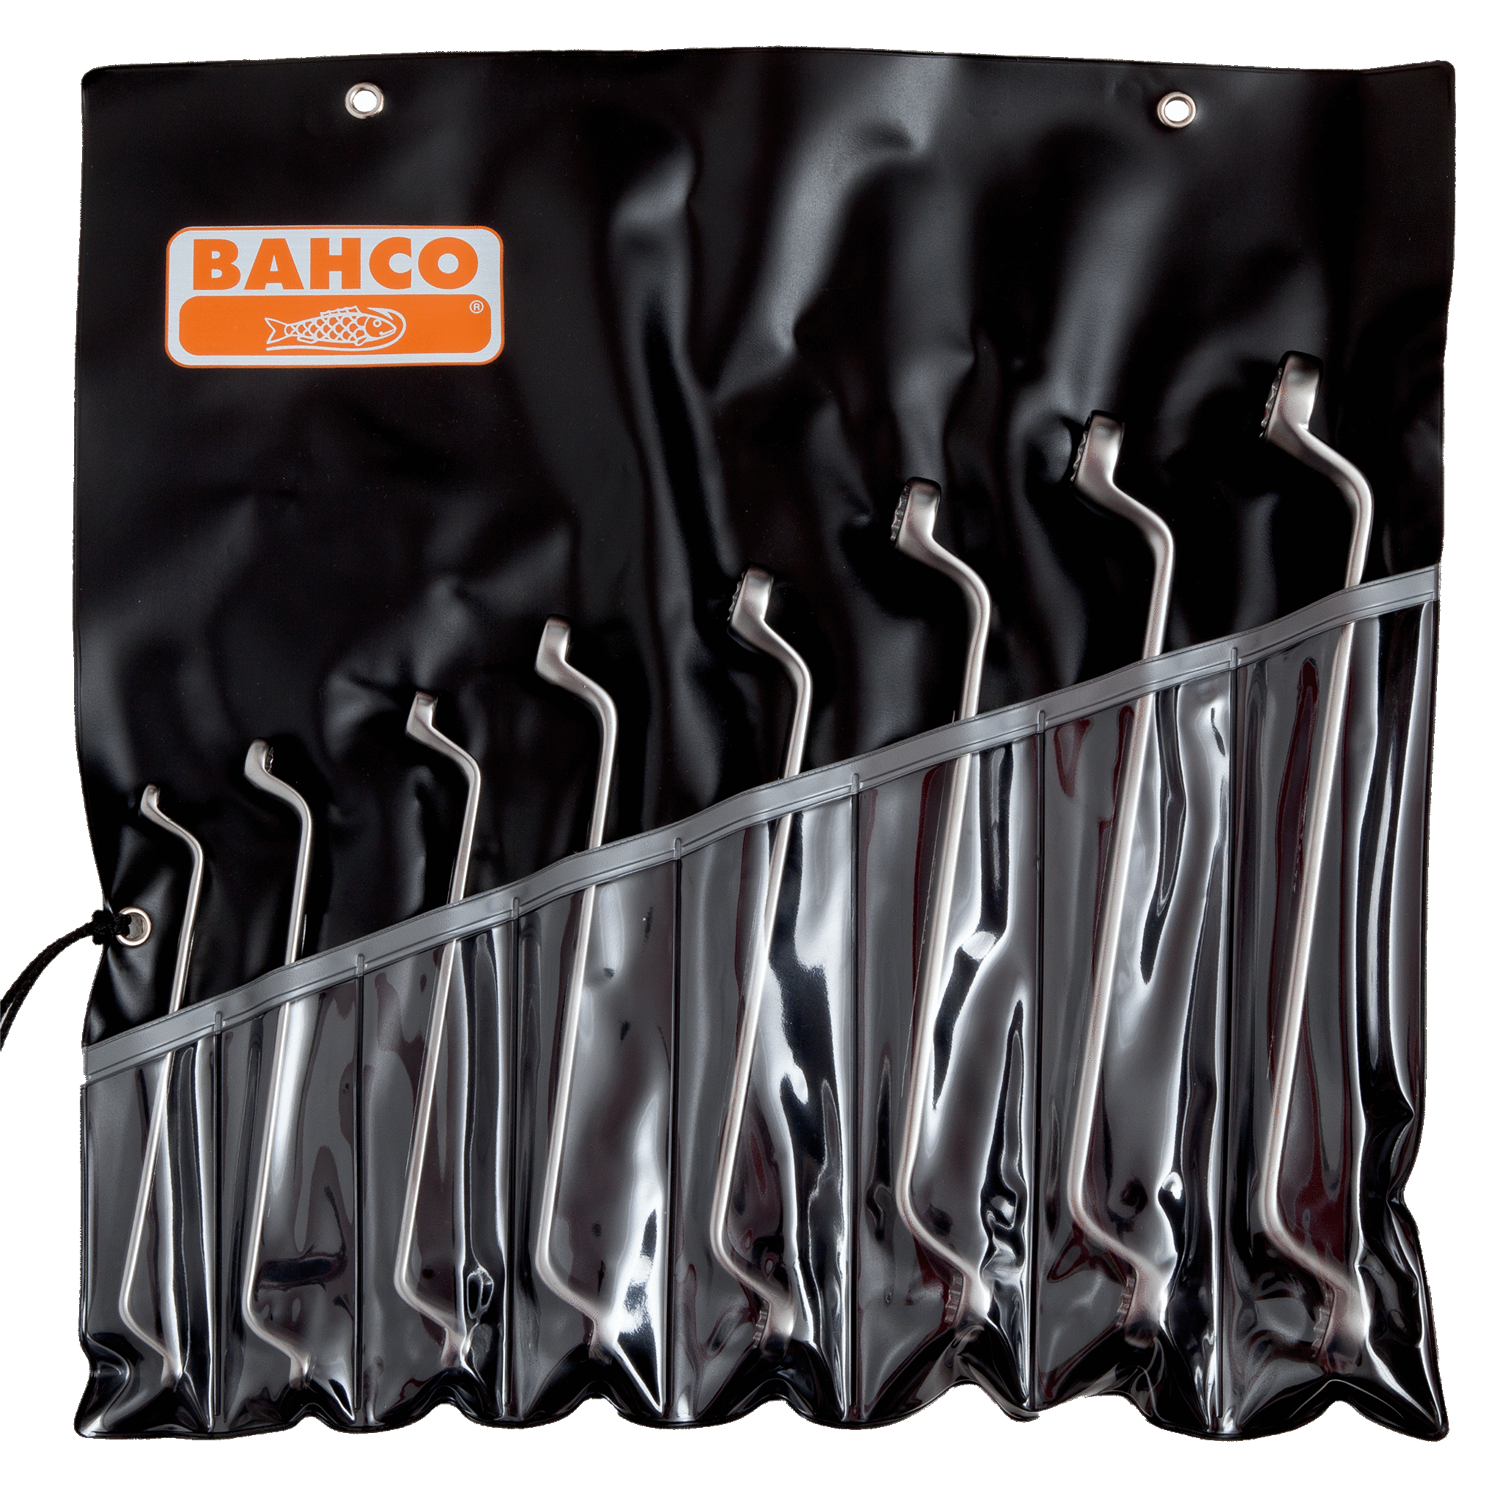 BAHCO 2M/8T Metric Deep Offset Double Ring Ended Wrench Set-8 Pcs - Premium Offset Double Ring Ended Wrench Set from BAHCO - Shop now at Yew Aik.